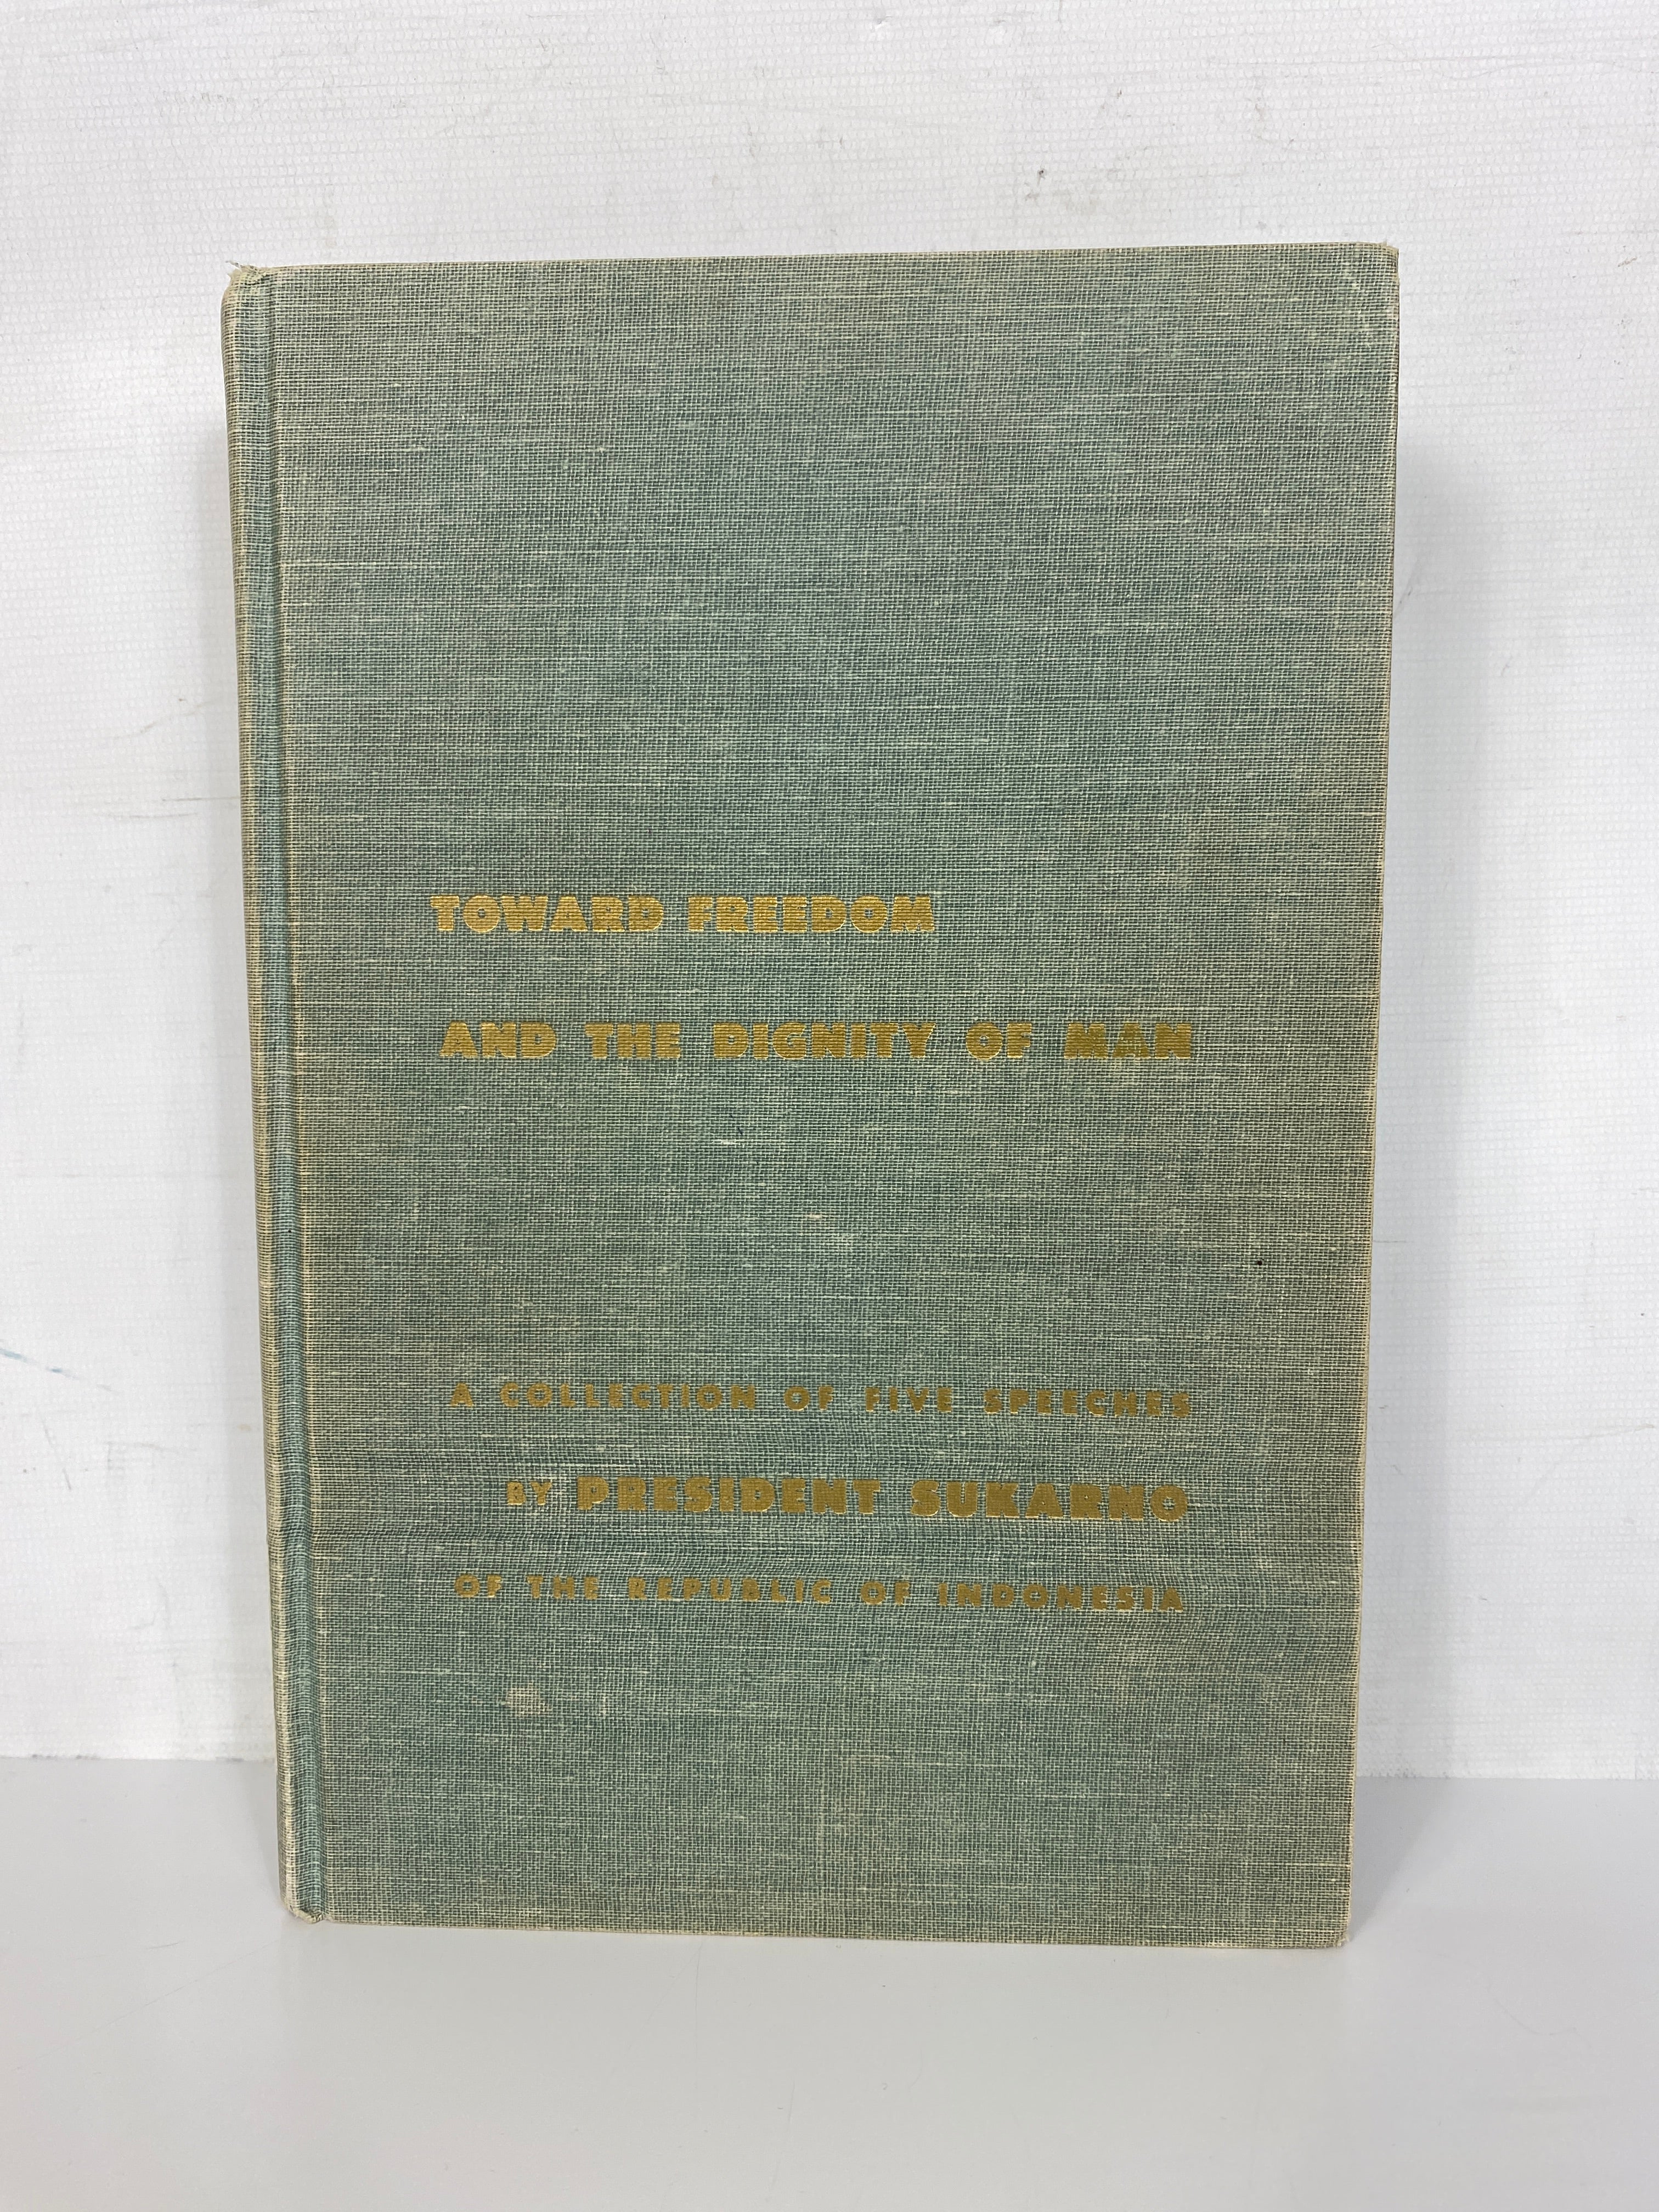 Toward Freedom and the Dignity of Man by President Sukarno of Indonesia 1961 HC